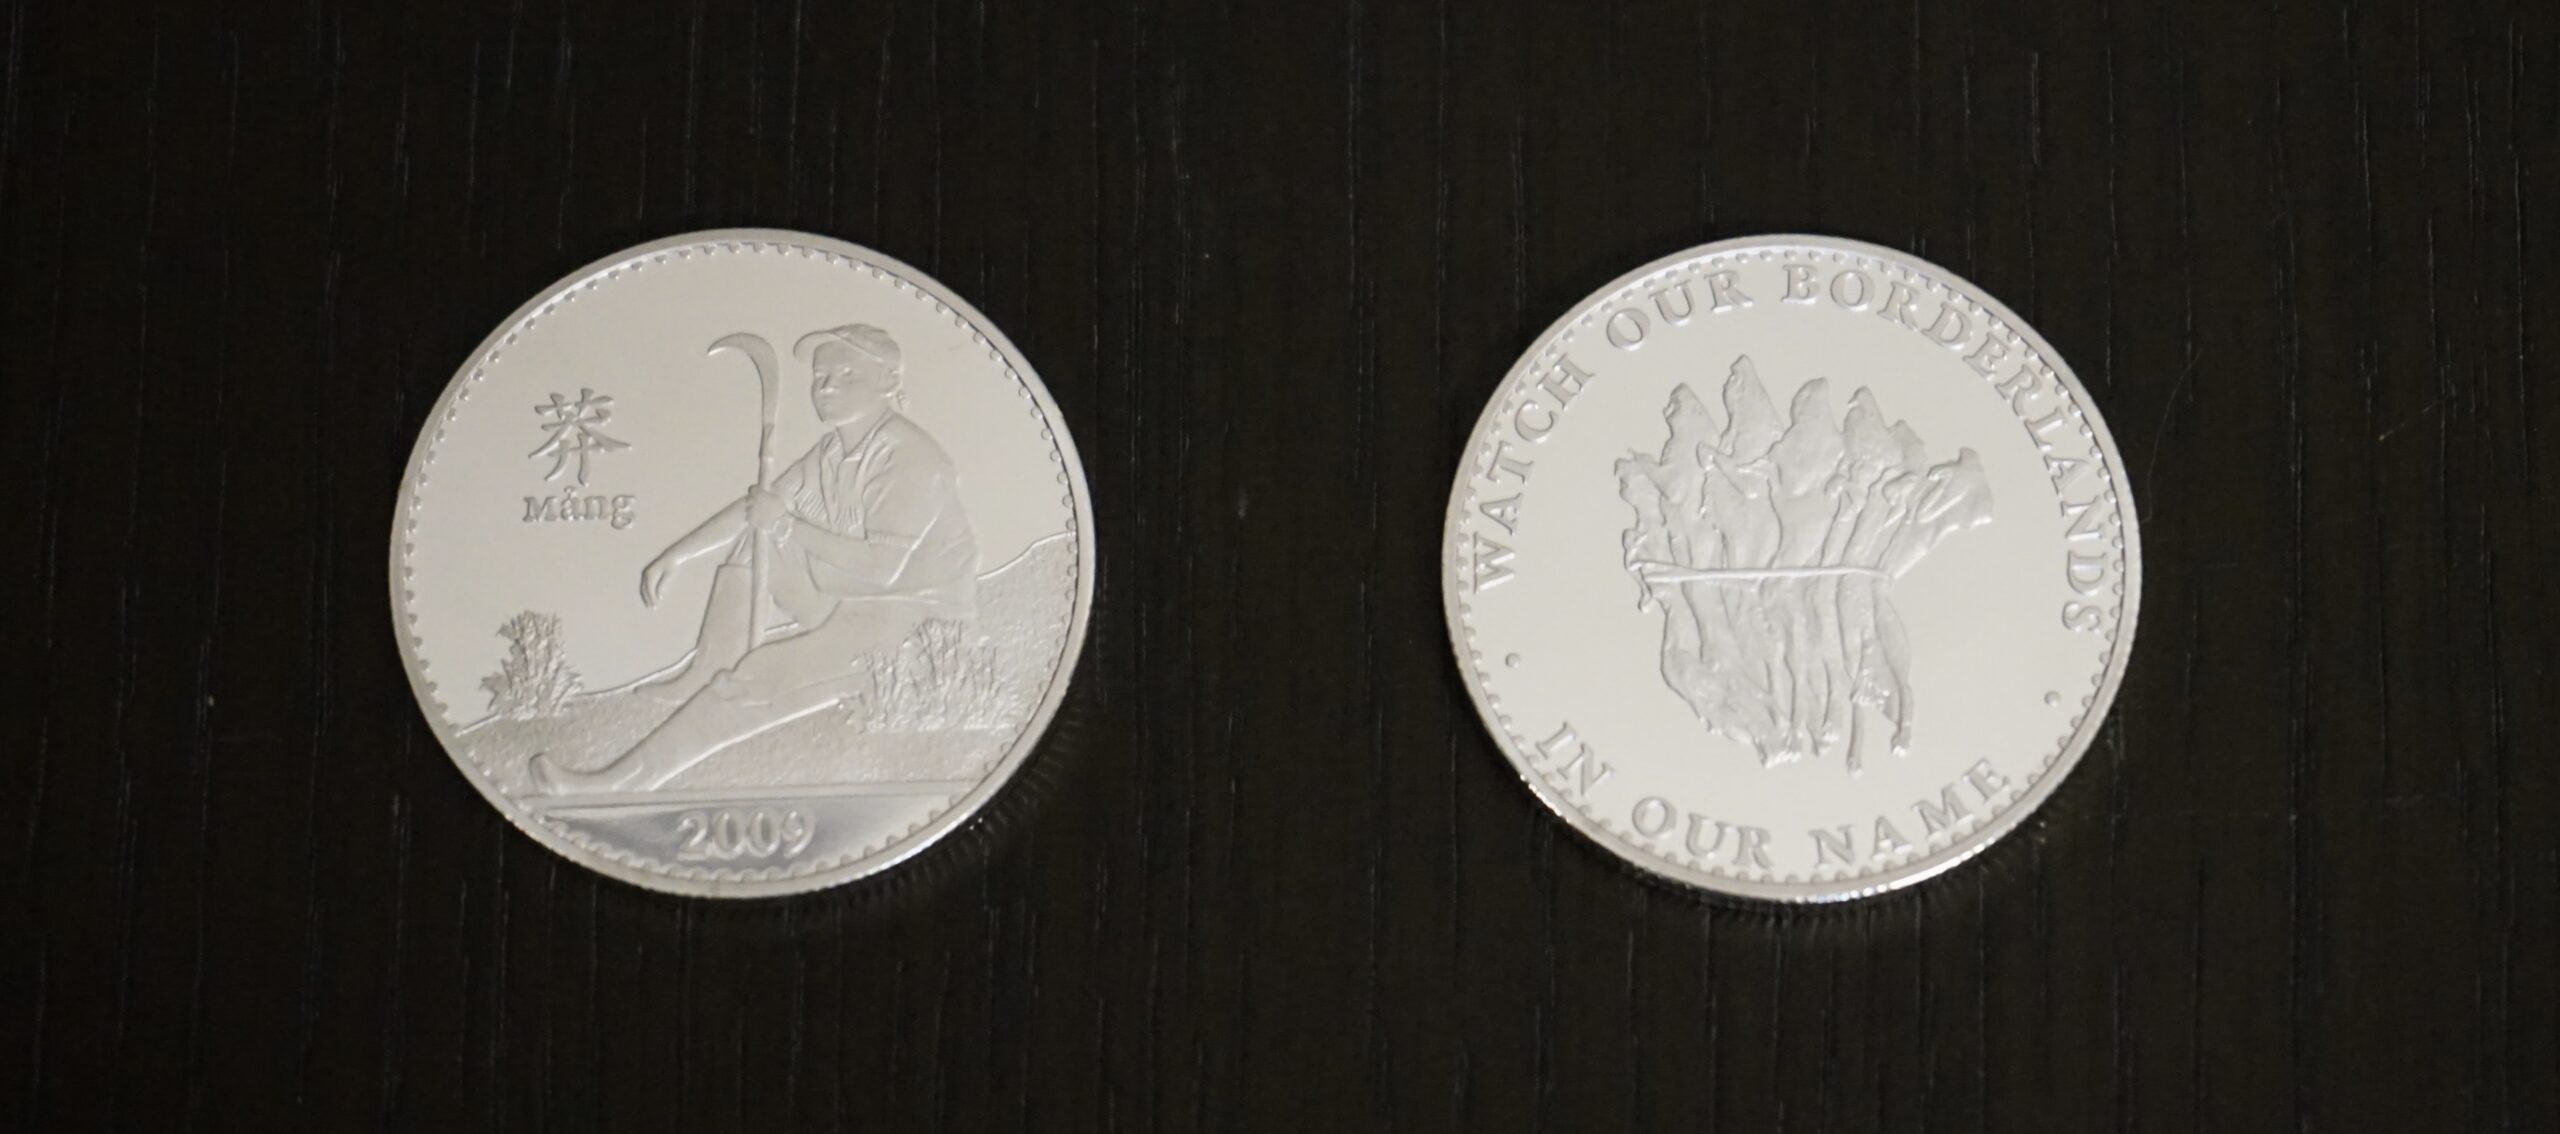 Two silver coins place side by side on black velvet. The left coin depicts a man sitting, holding a sickle with inscriptions of the year 2009 and Mang, an ethnic group of people who live along the China-Vietman border.